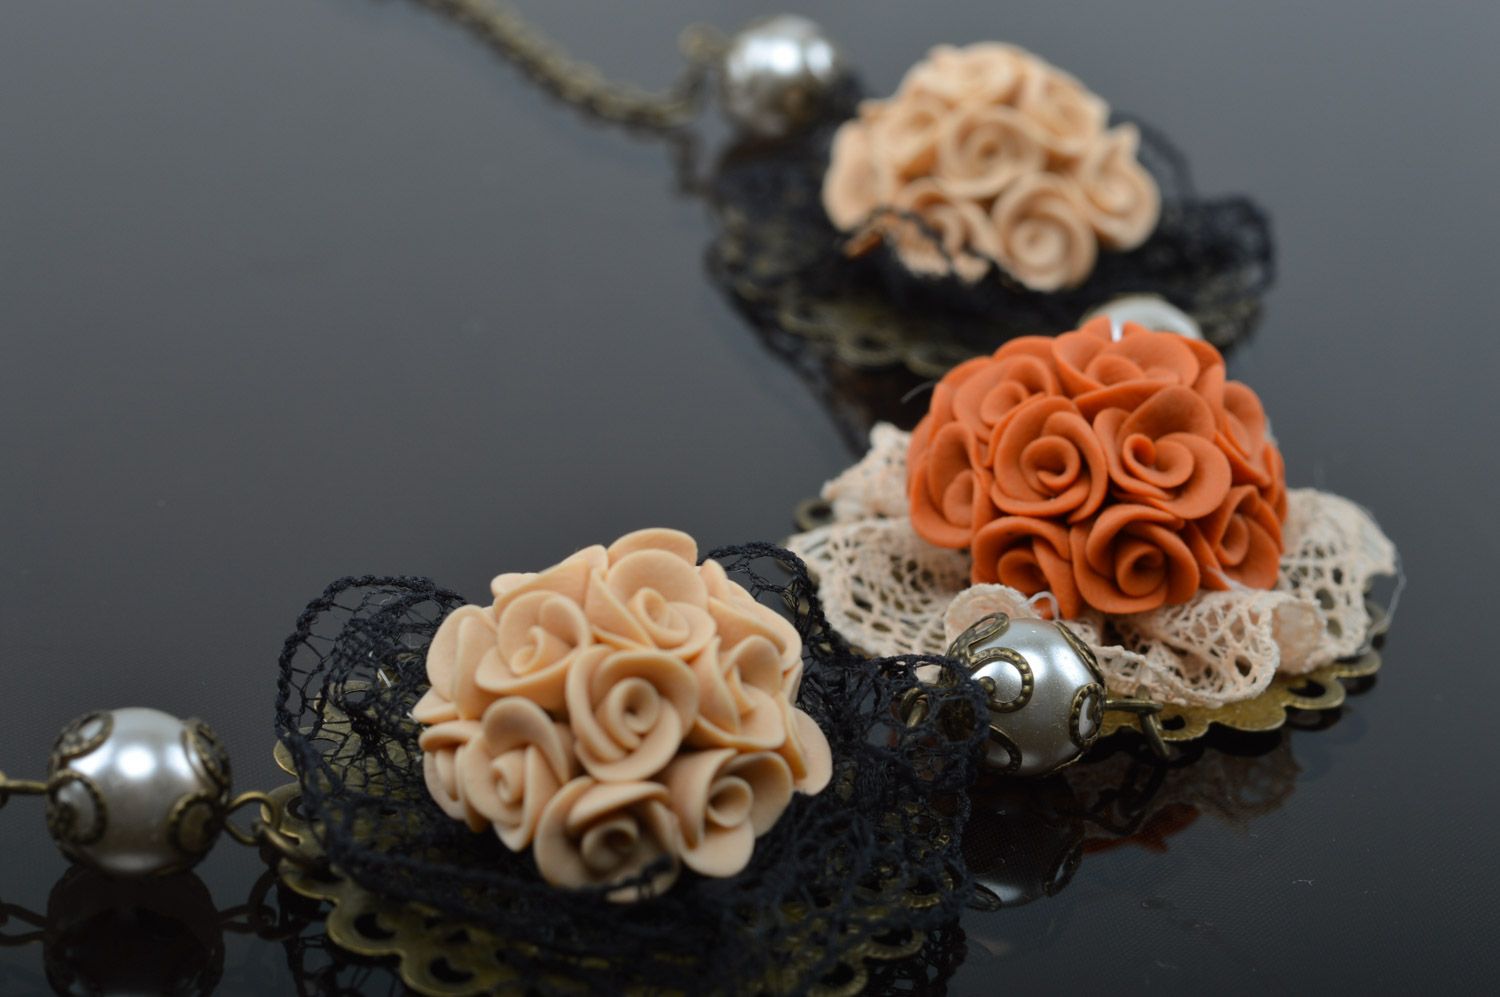 Handmade volume polymer clay flower necklace with lace and beads in antique style photo 2